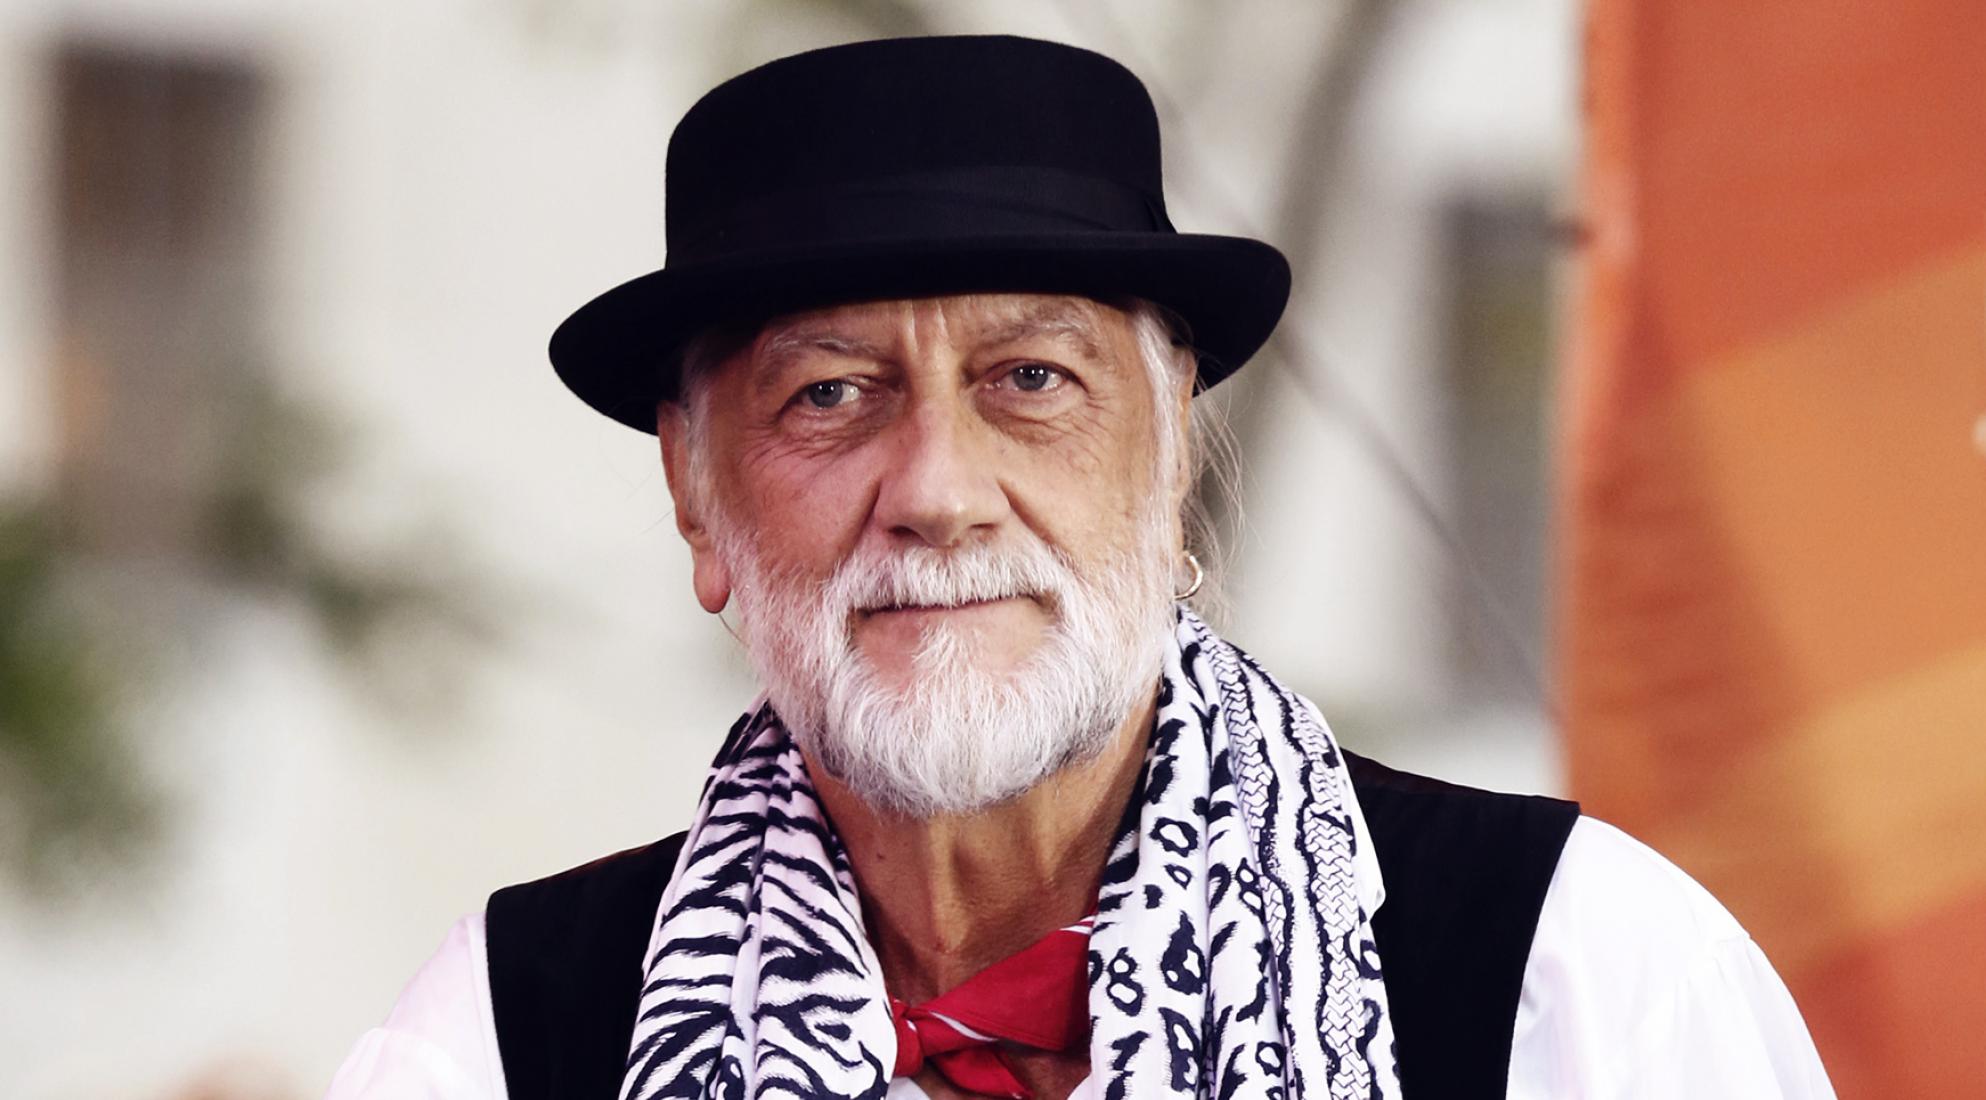 Happy Birthday Mick Fleetwood! Born on this date in 1947. 